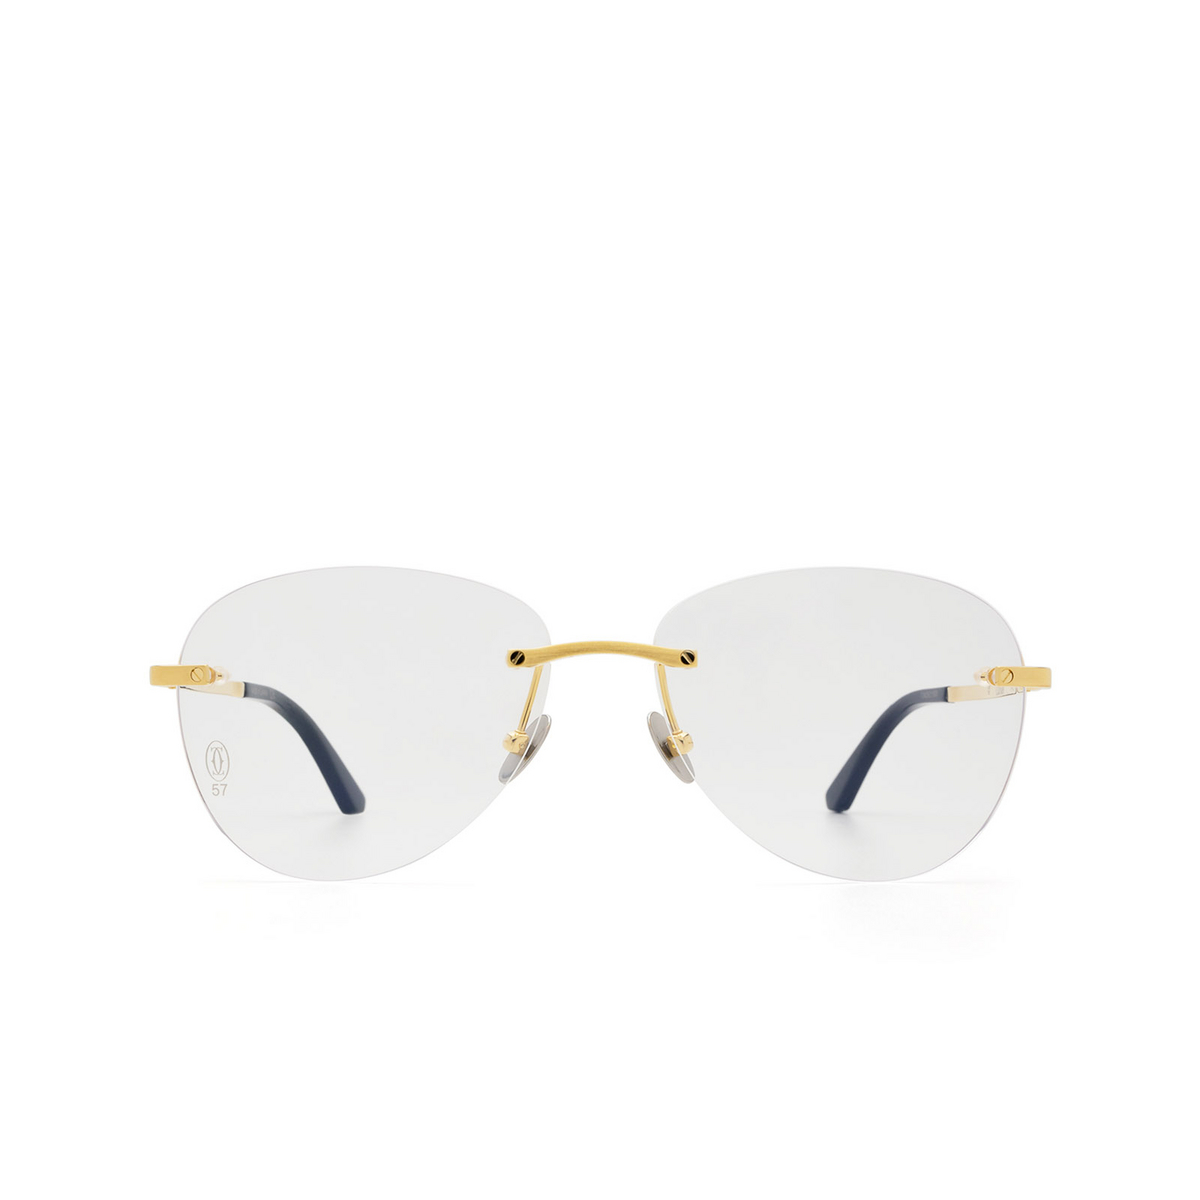 Cartier CT0254O Eyeglasses 001 Gold - front view